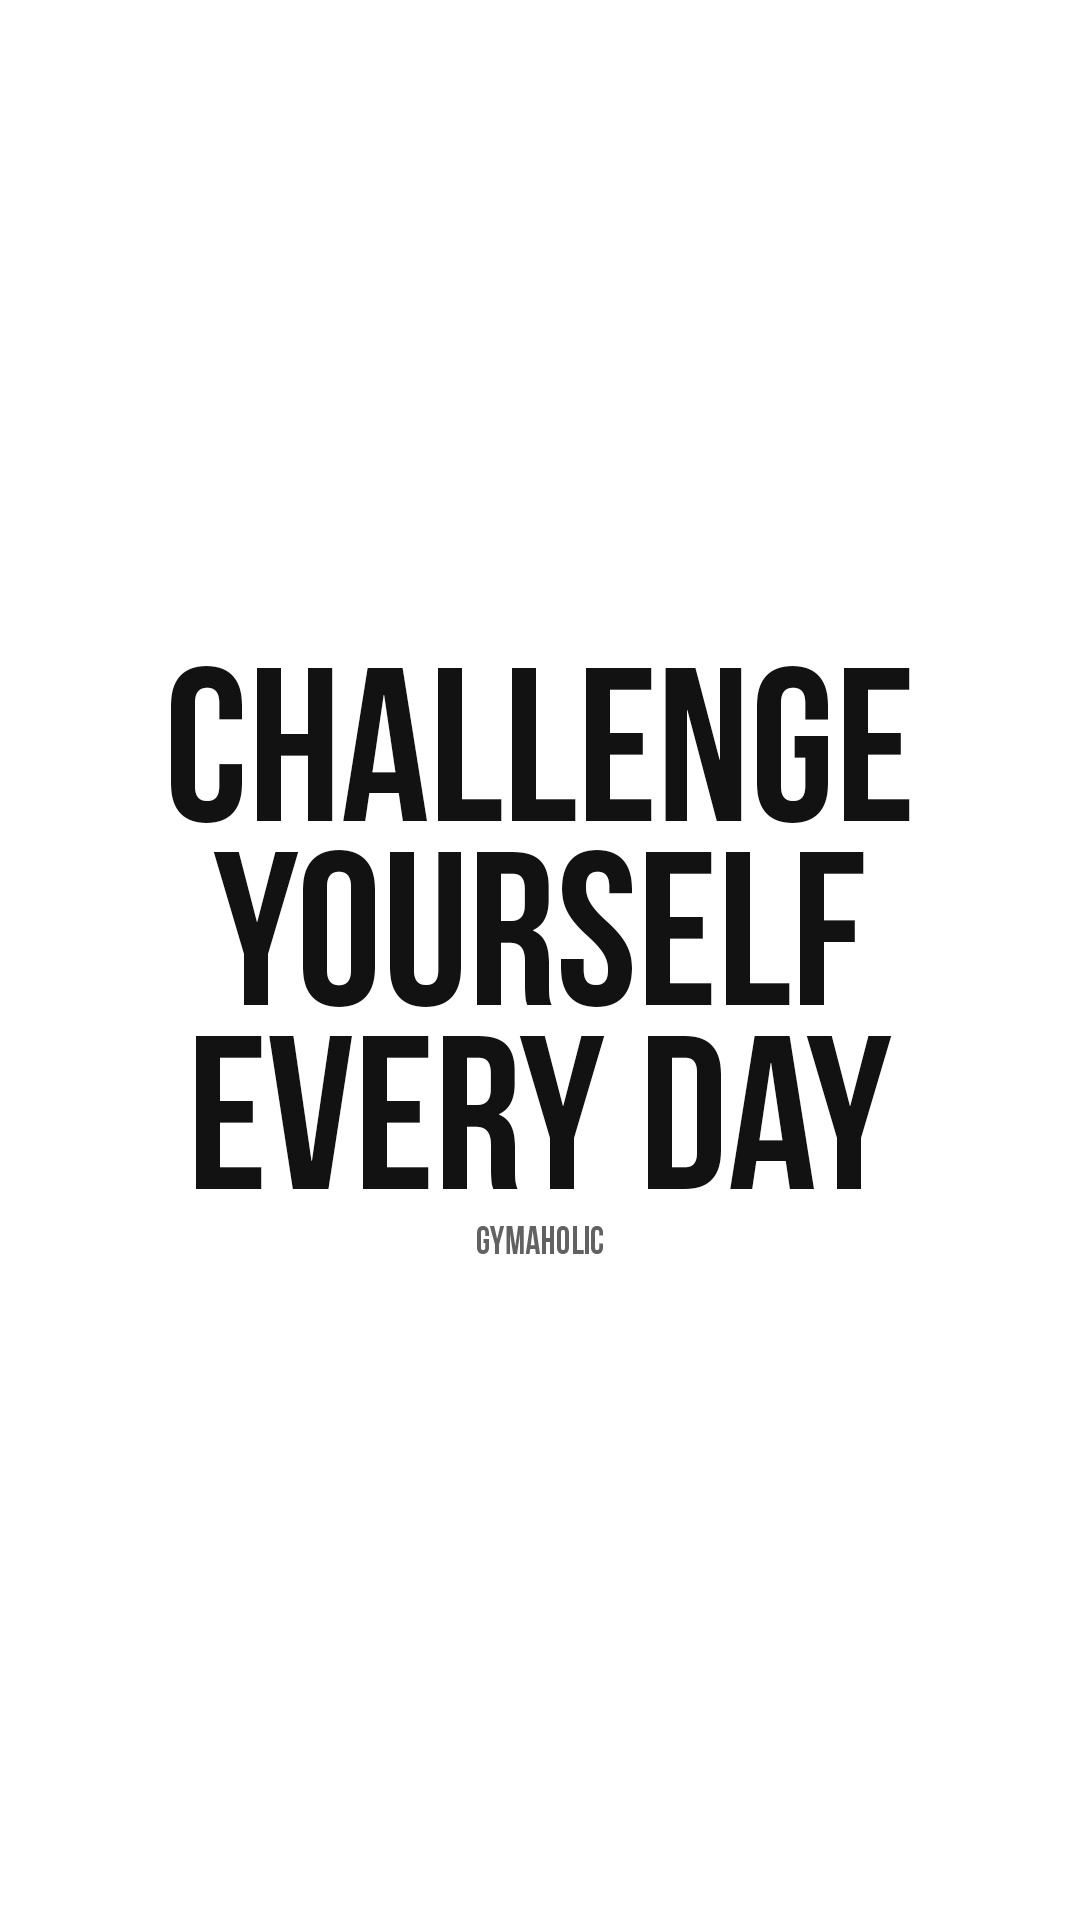 Challenge yourself every day